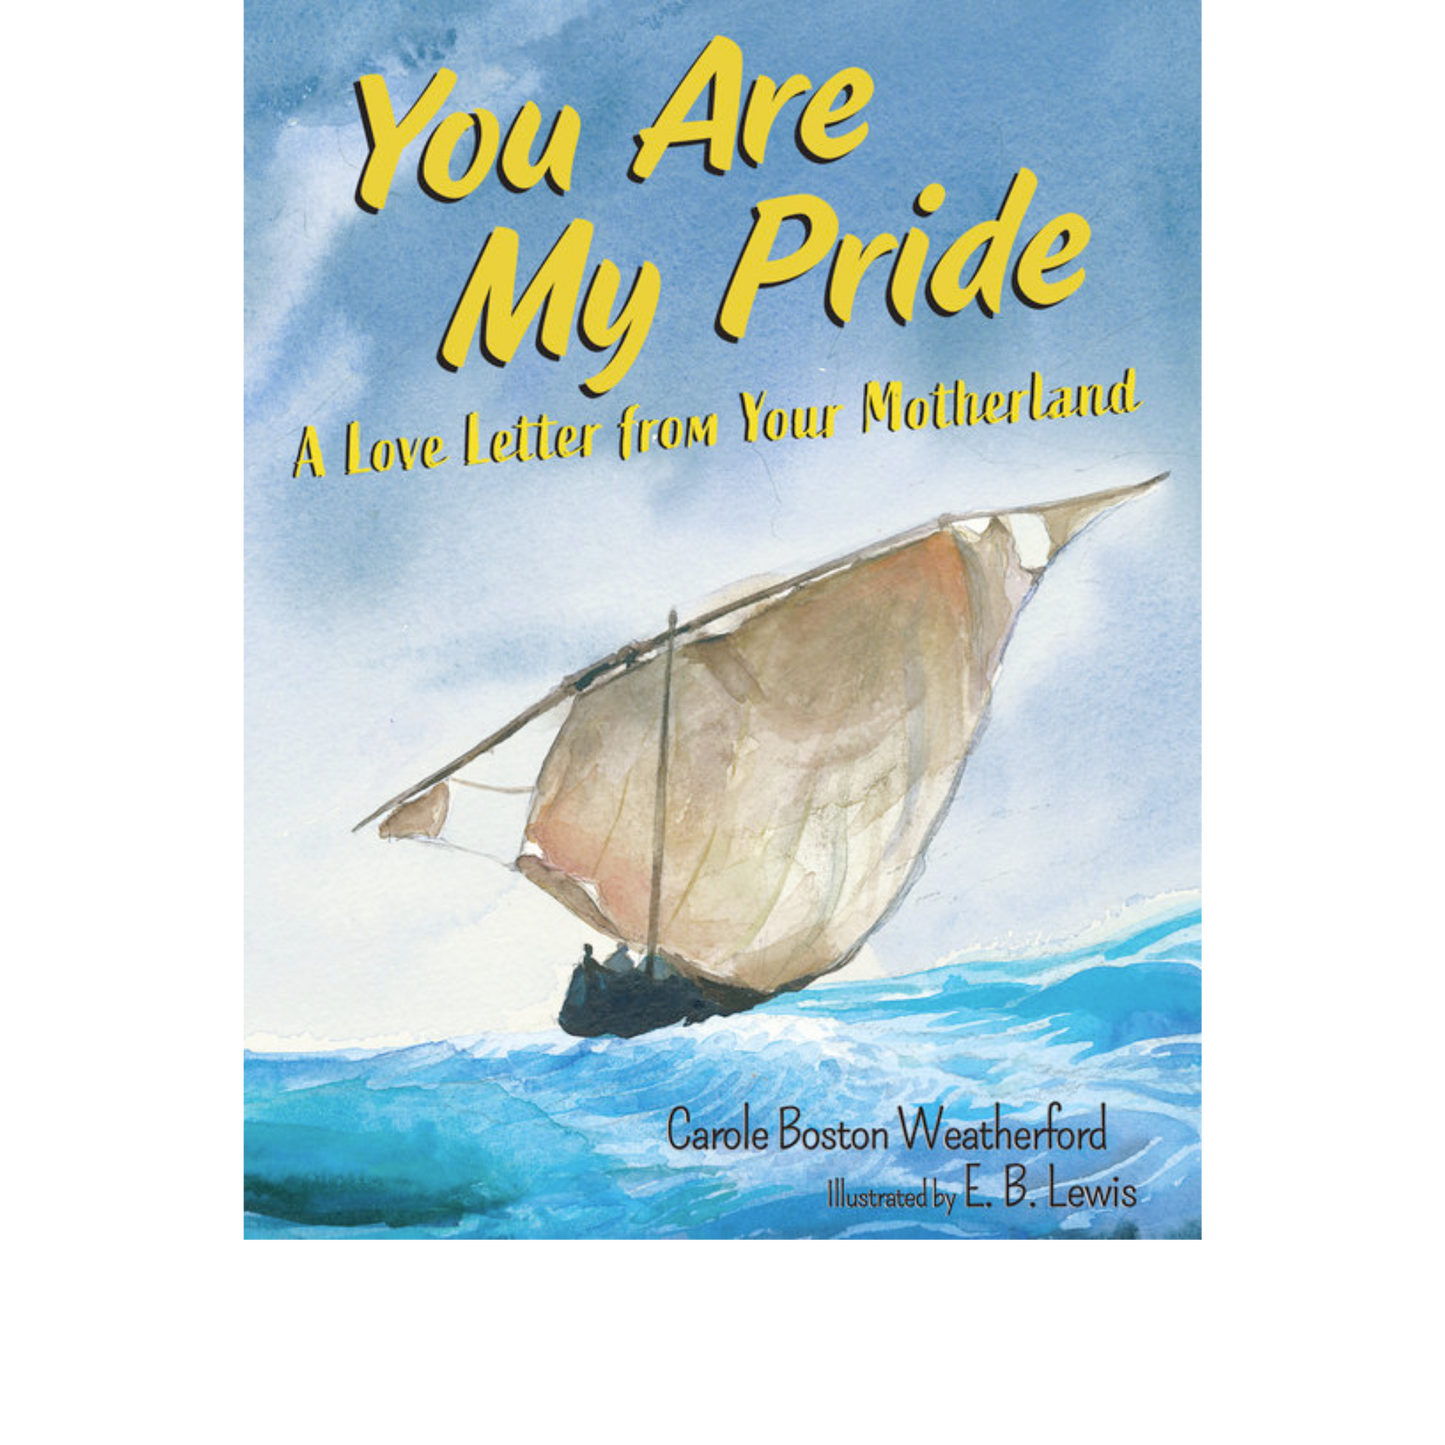 you are my pride carole boston weatherford